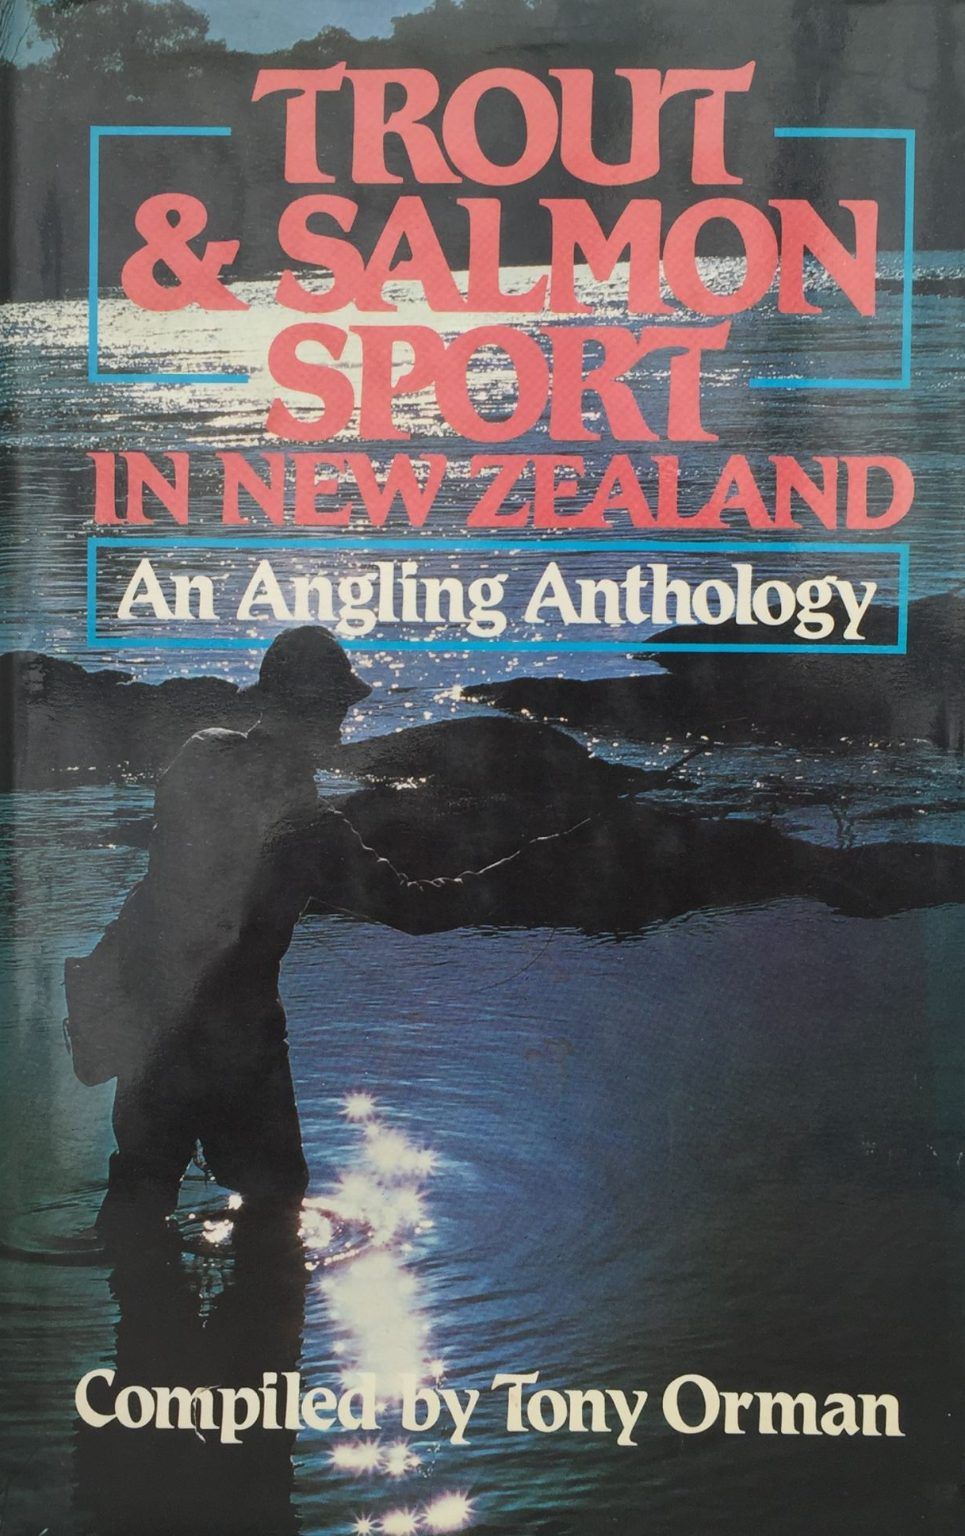 TROUT & SALMON SPORT IN NEW ZEALAND: An Angling Anthology